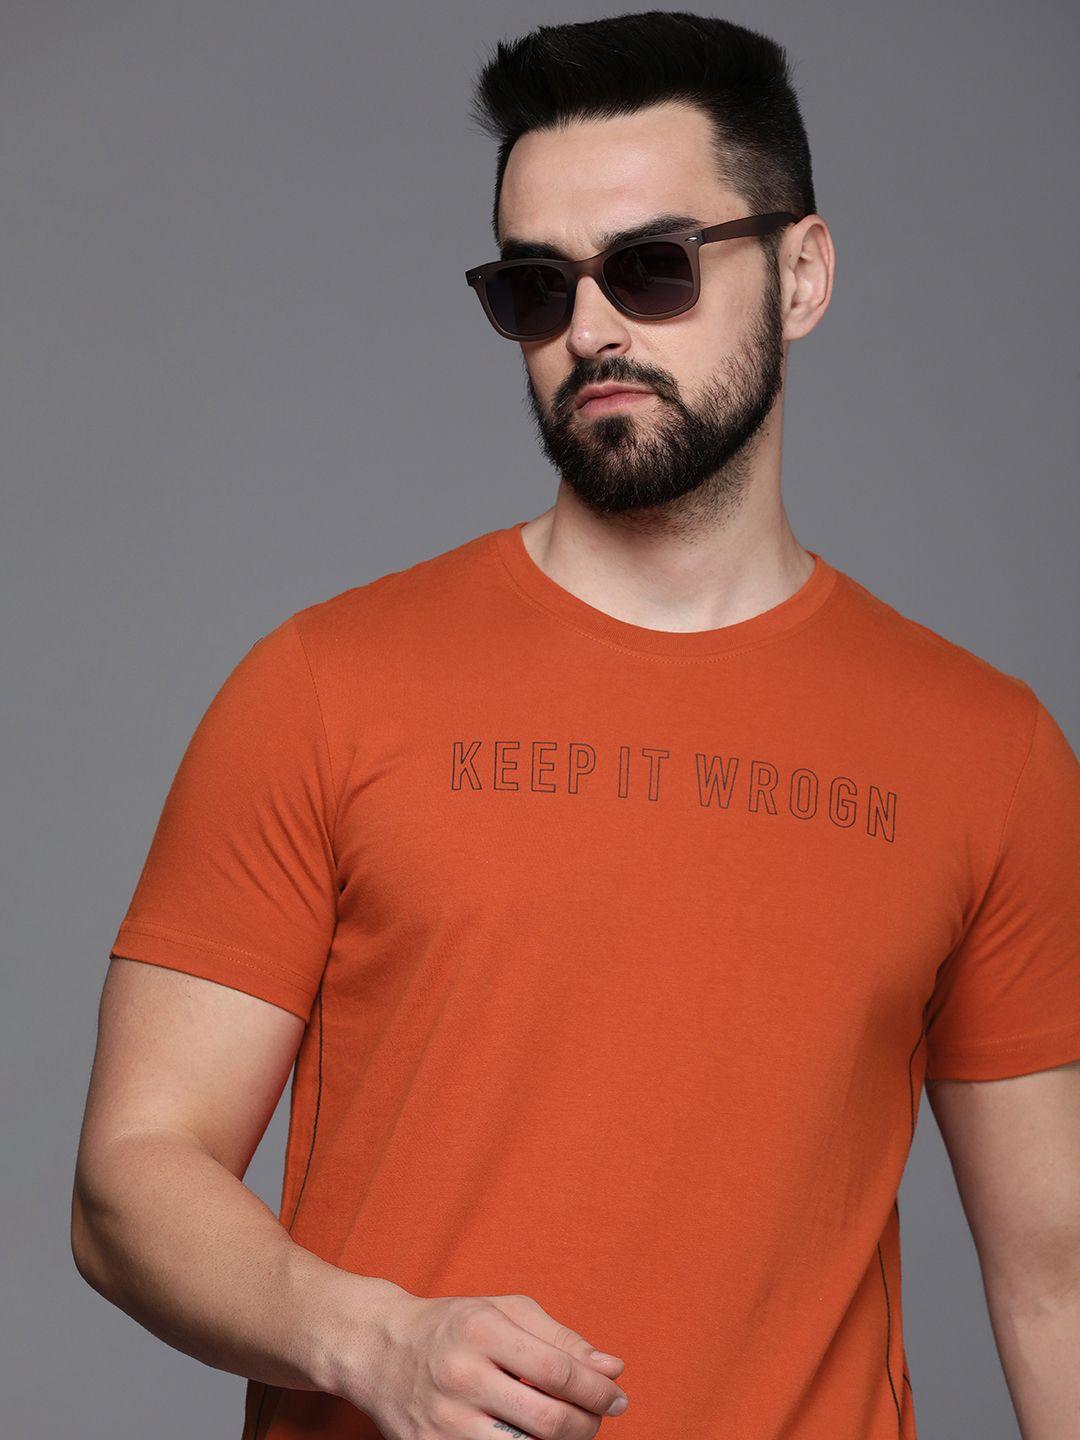 wrogn typography printed pure cotton slim fit t-shirt